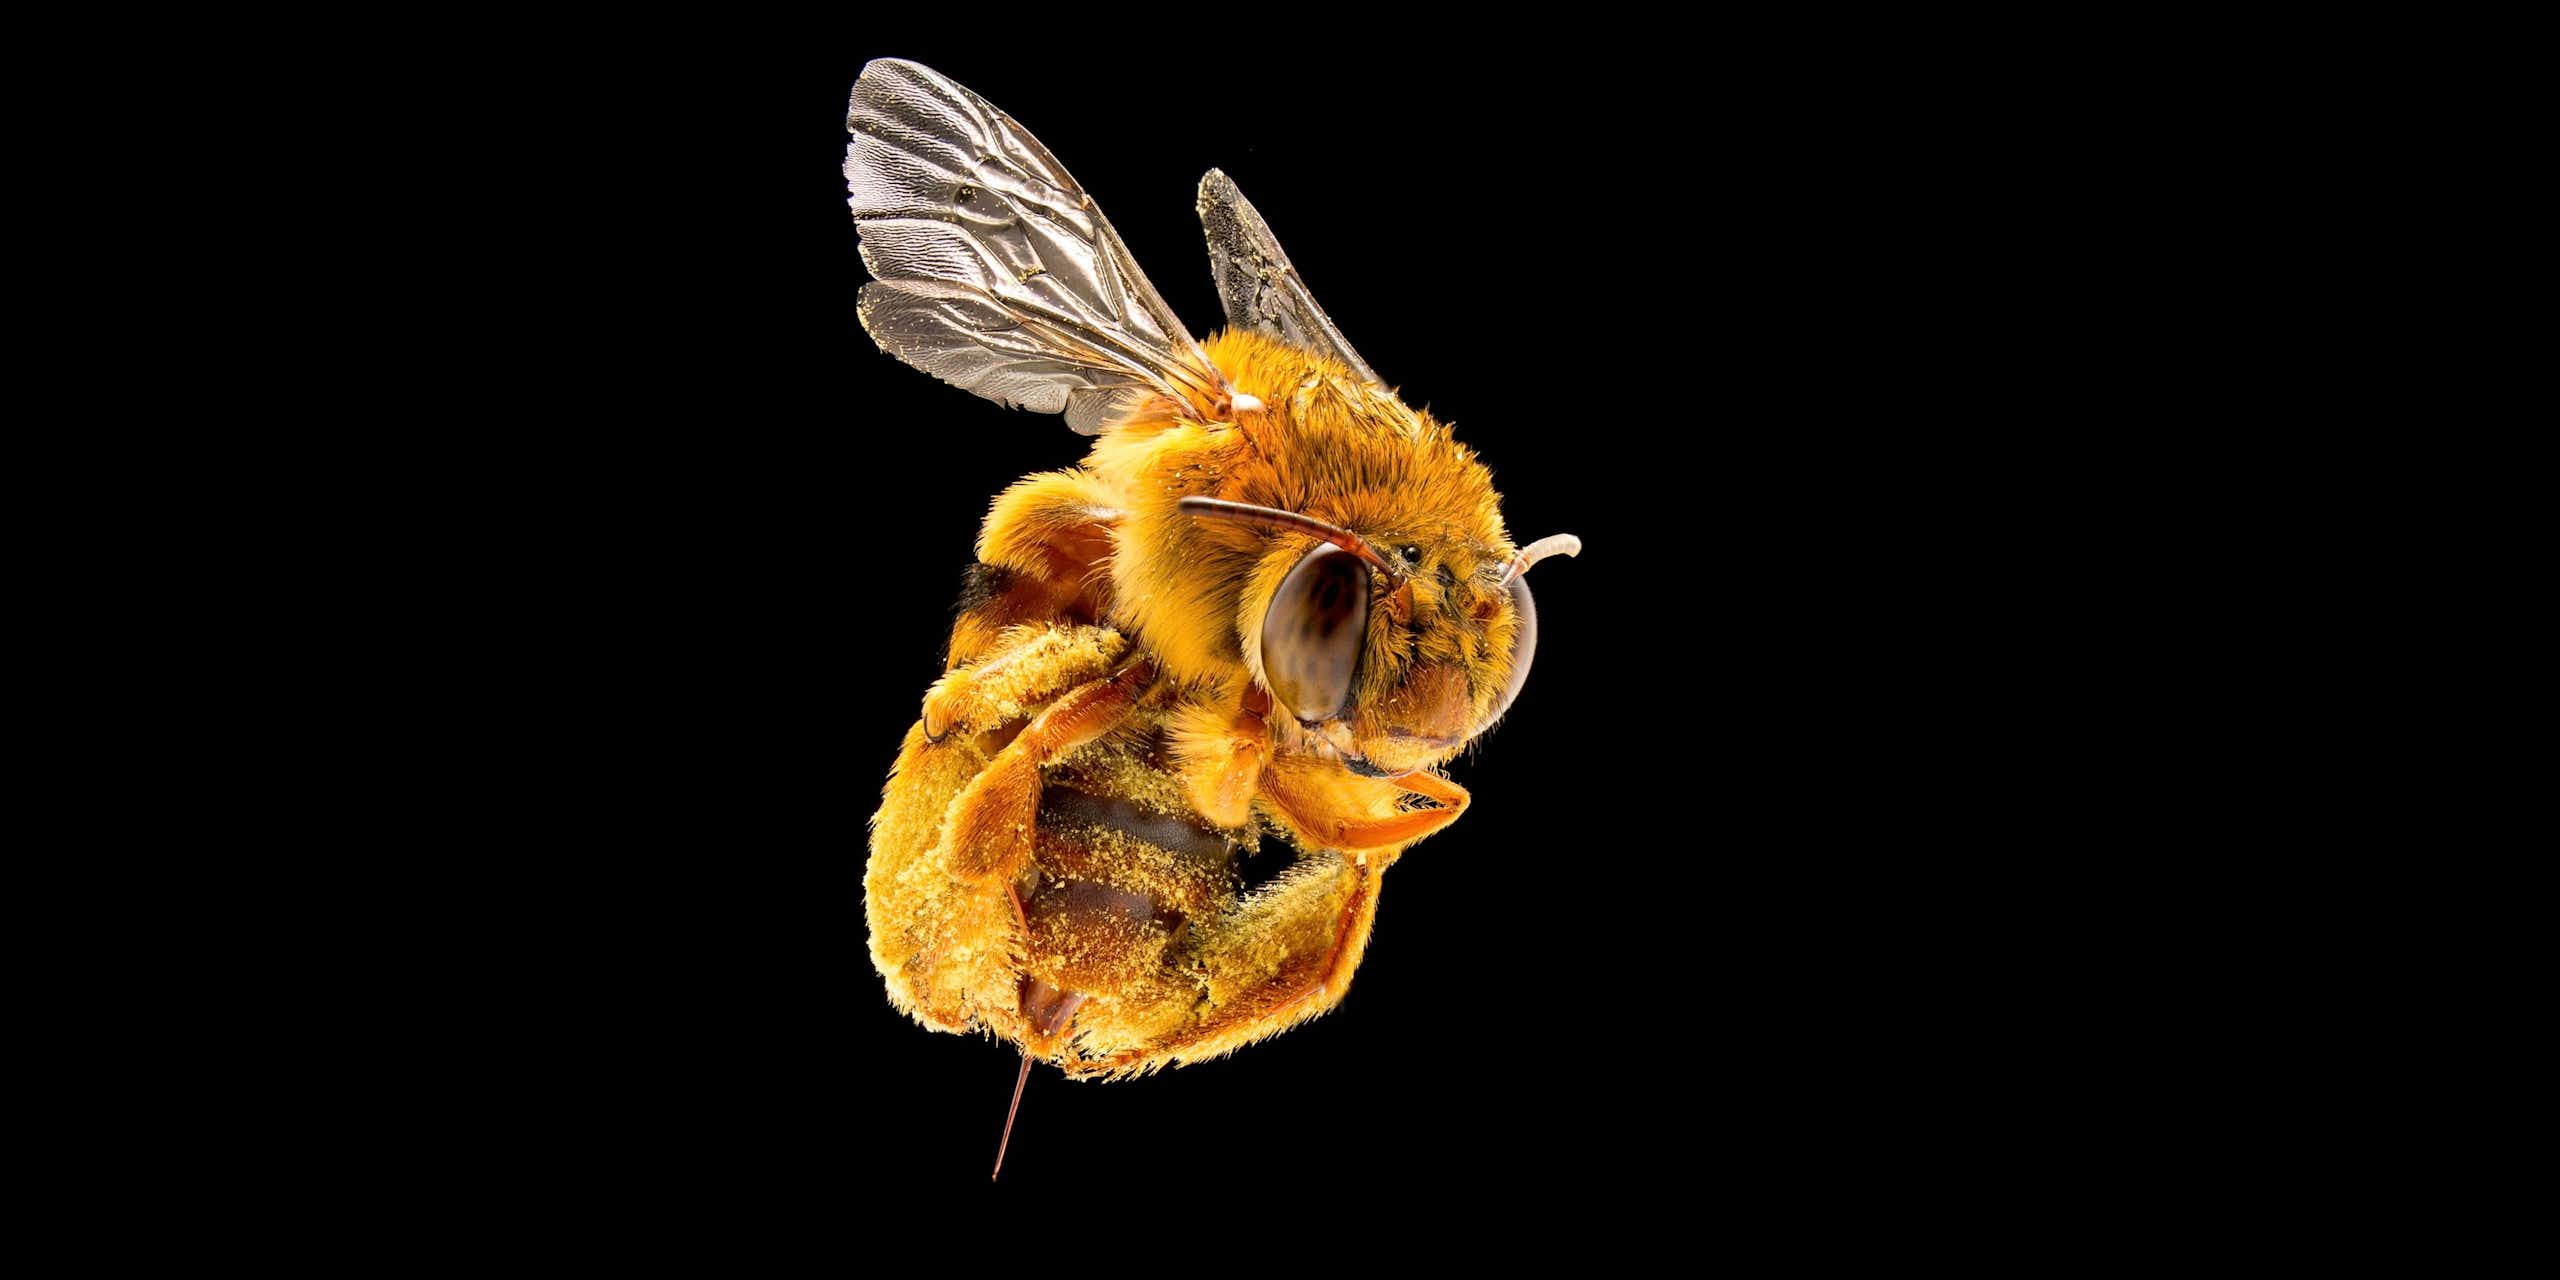 A photo of a furry-looking bee with a large stinger.